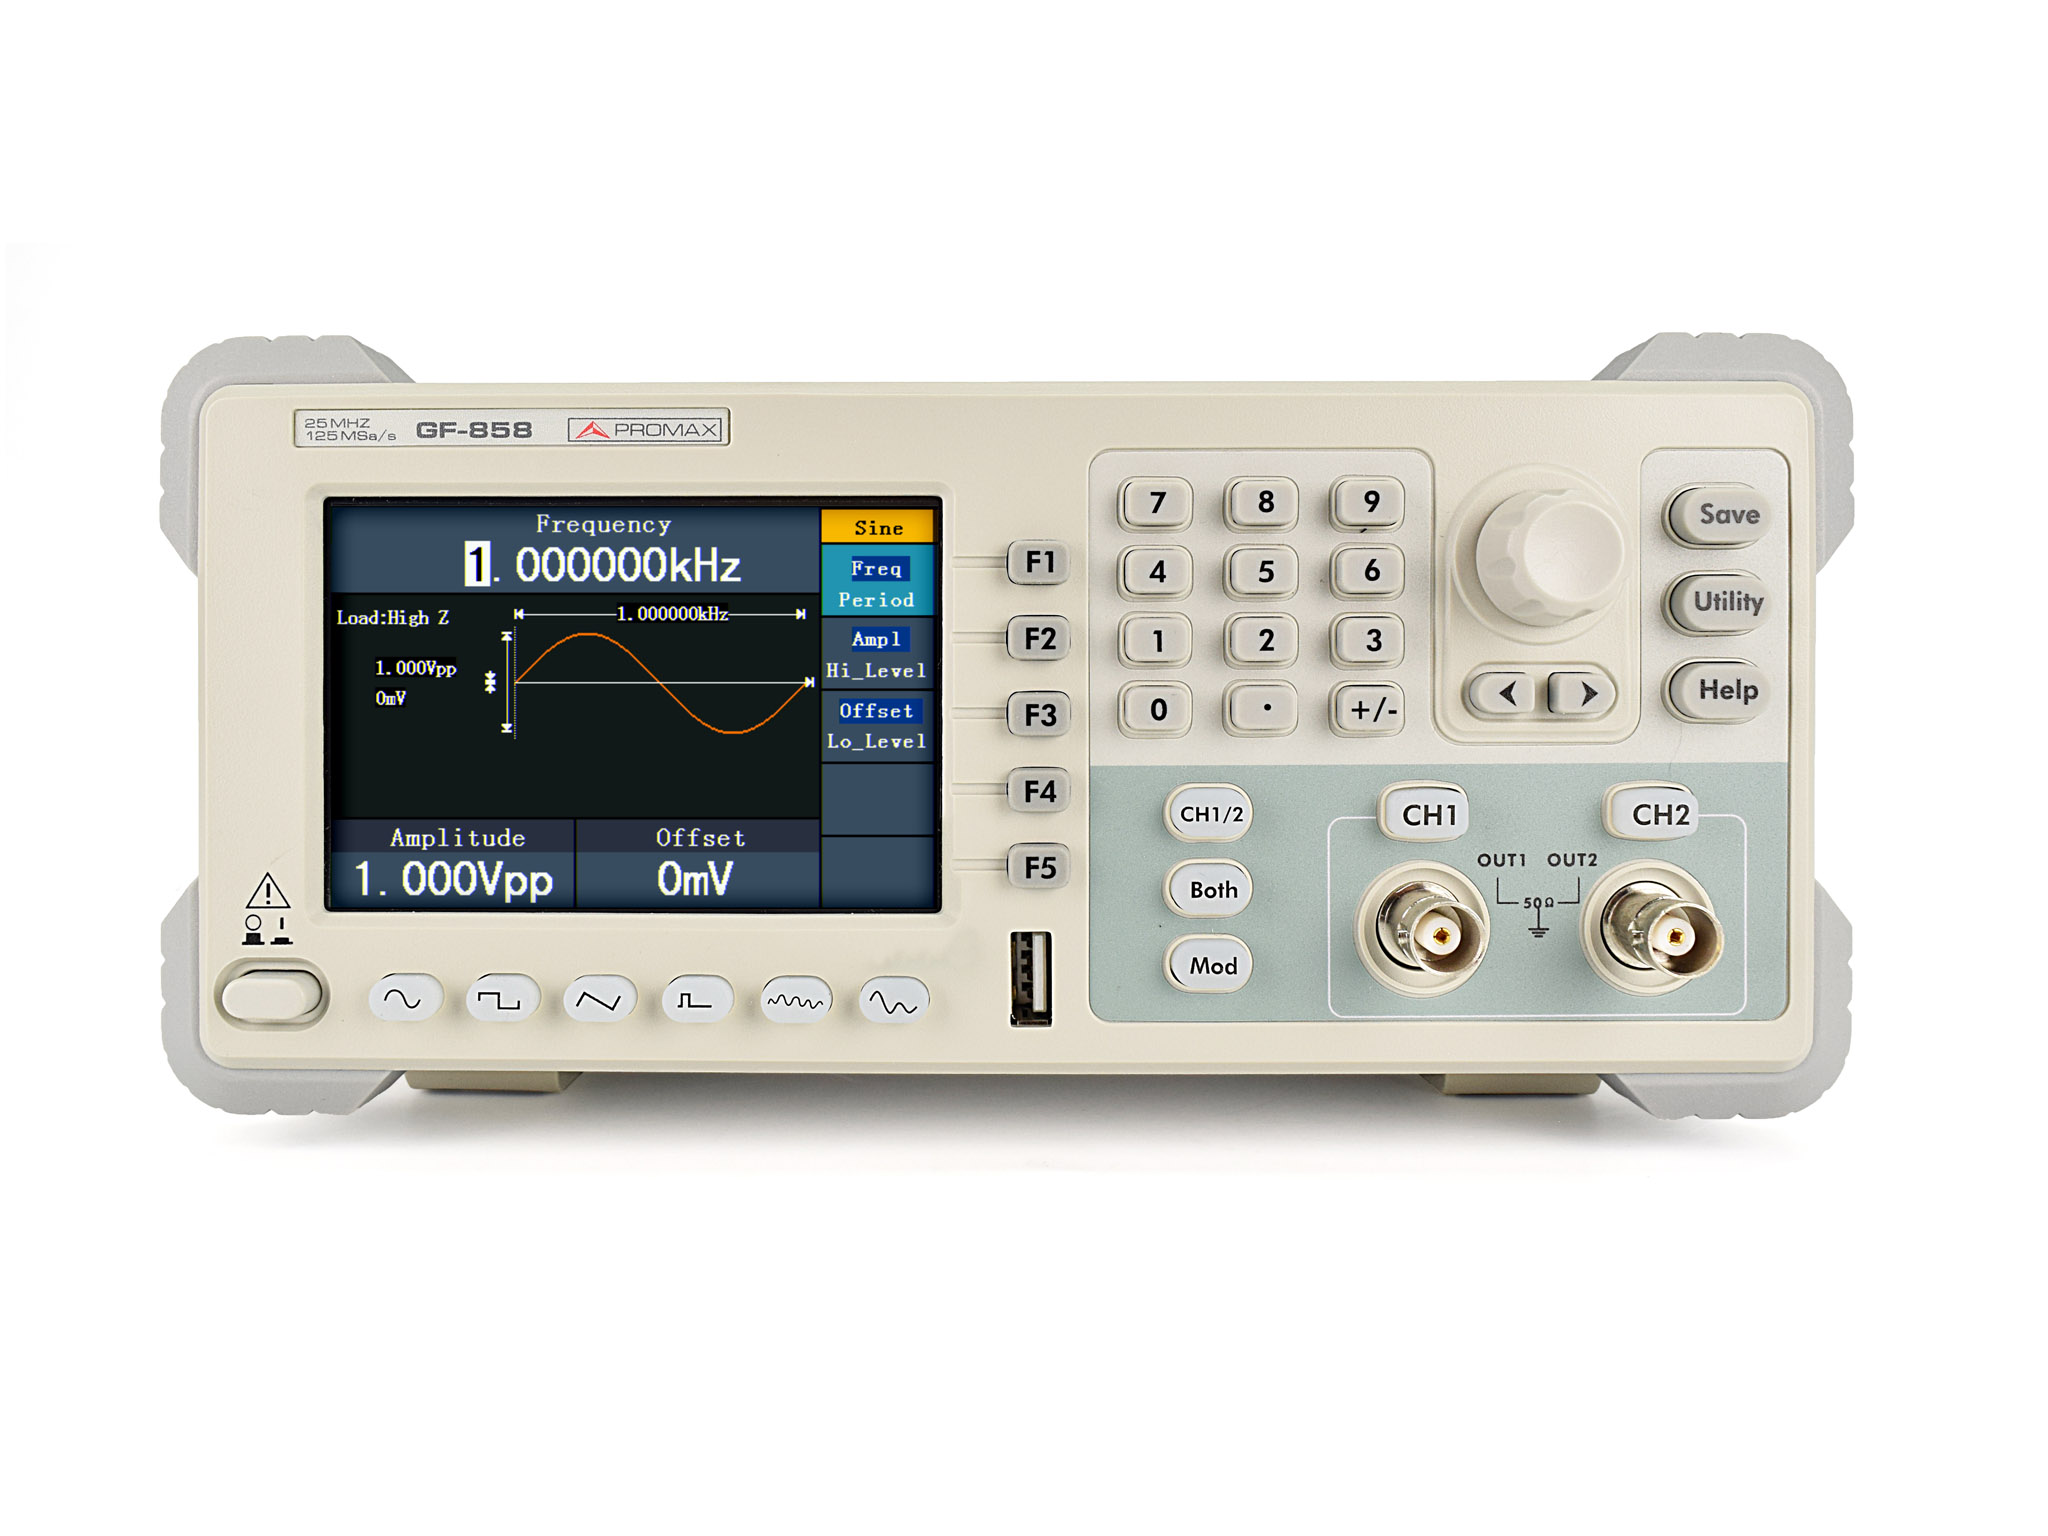 GF-858: 25 MHz Arbitrary waveform generator with USB and RS-232